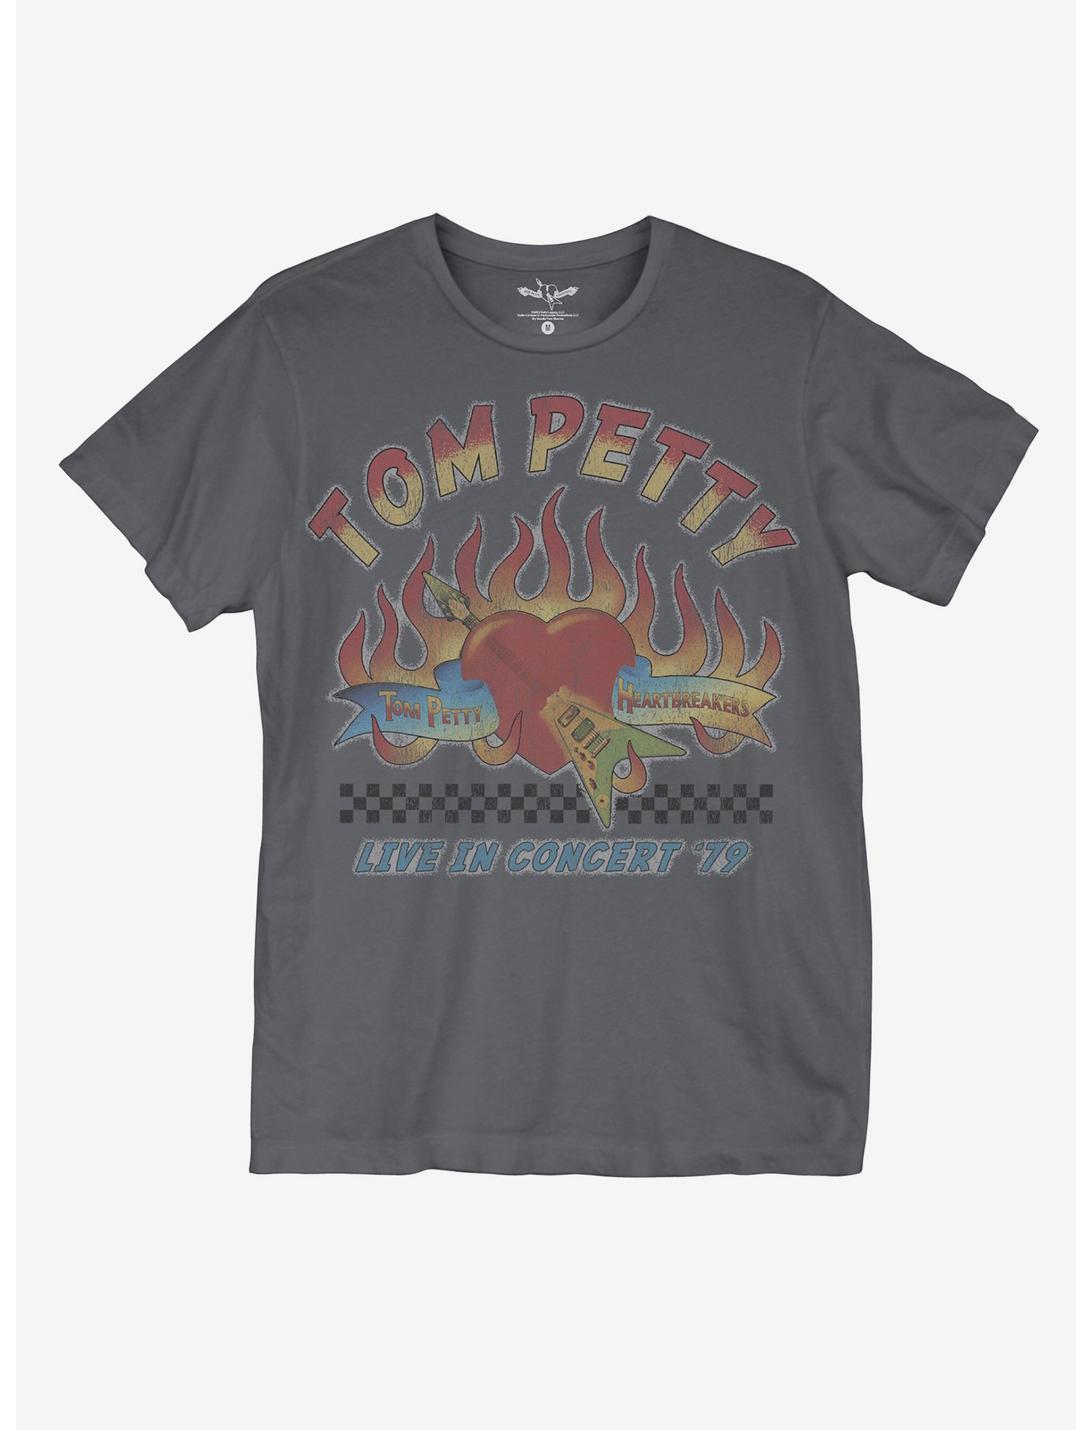 Tom Petty & The Heartbreakers Live in 1979 Boyfriend Fit Girls T-Shirt, CHARCOAL  GREY, hi-res